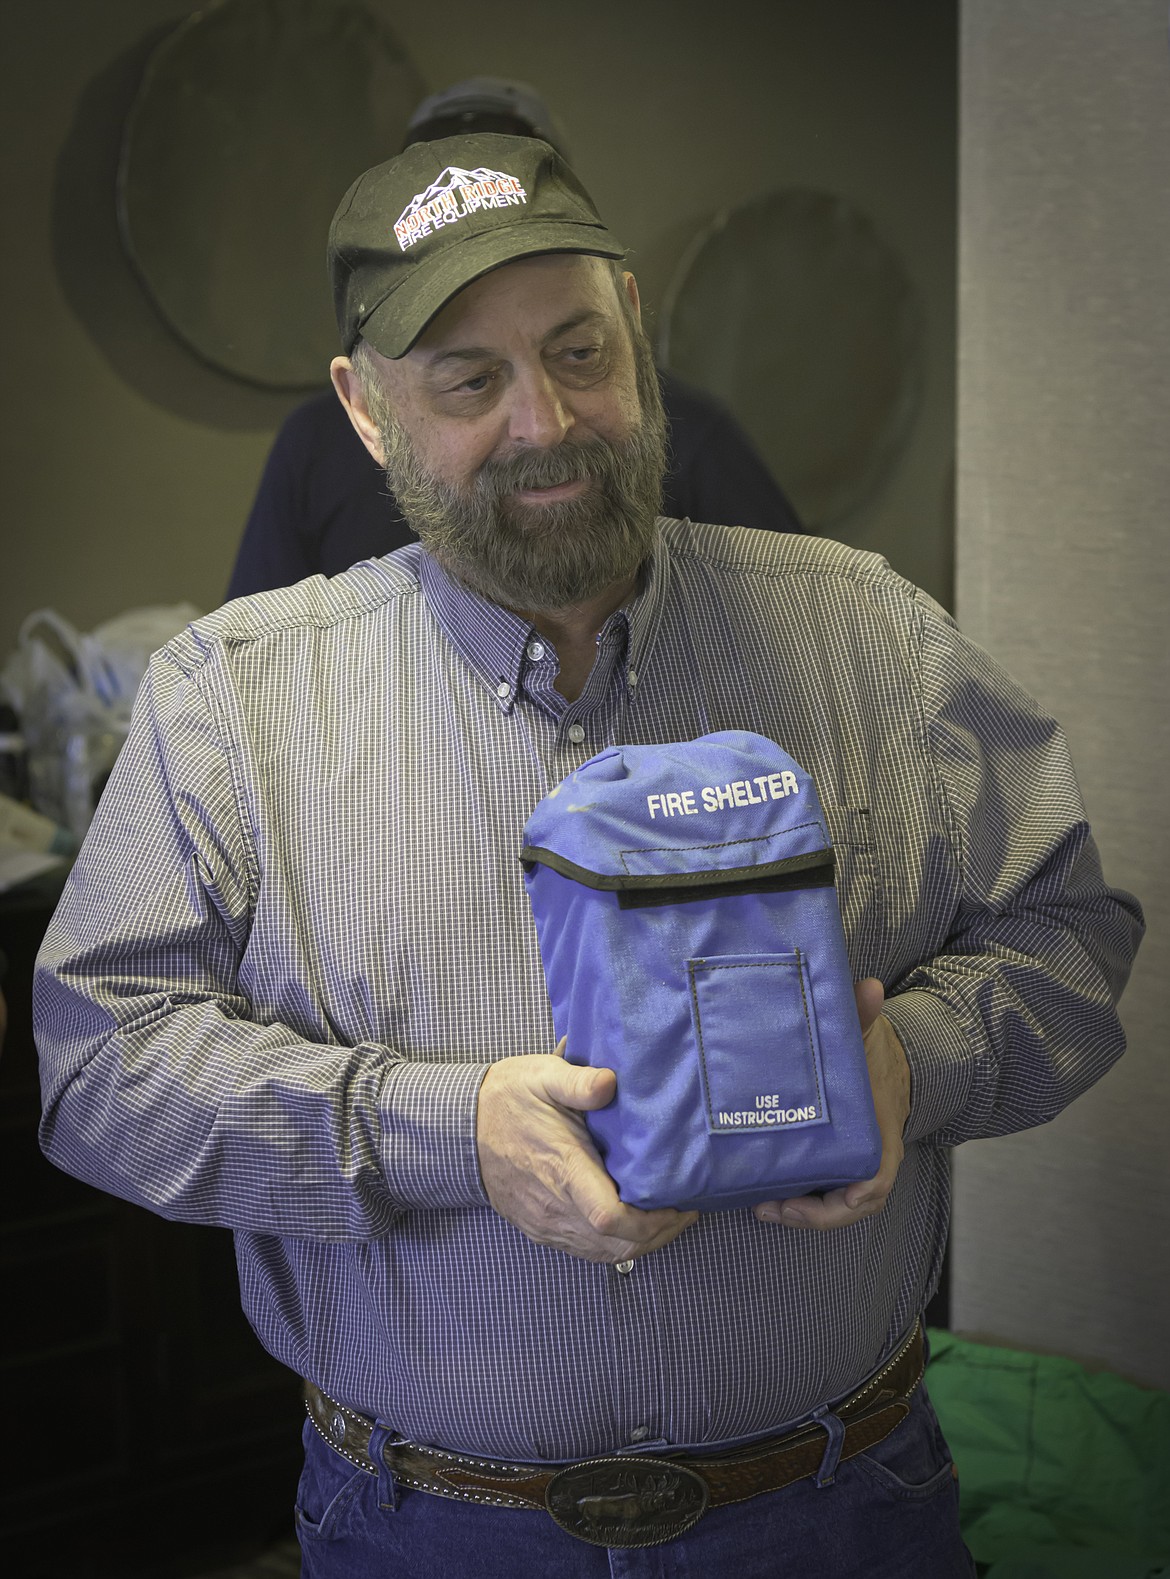 Richard Grady, owner Grady Bunch LLC, shows off a counterfeit personal fire shelter that is reportedly being sold in Montana. (Tracy Scott/Valley Press)